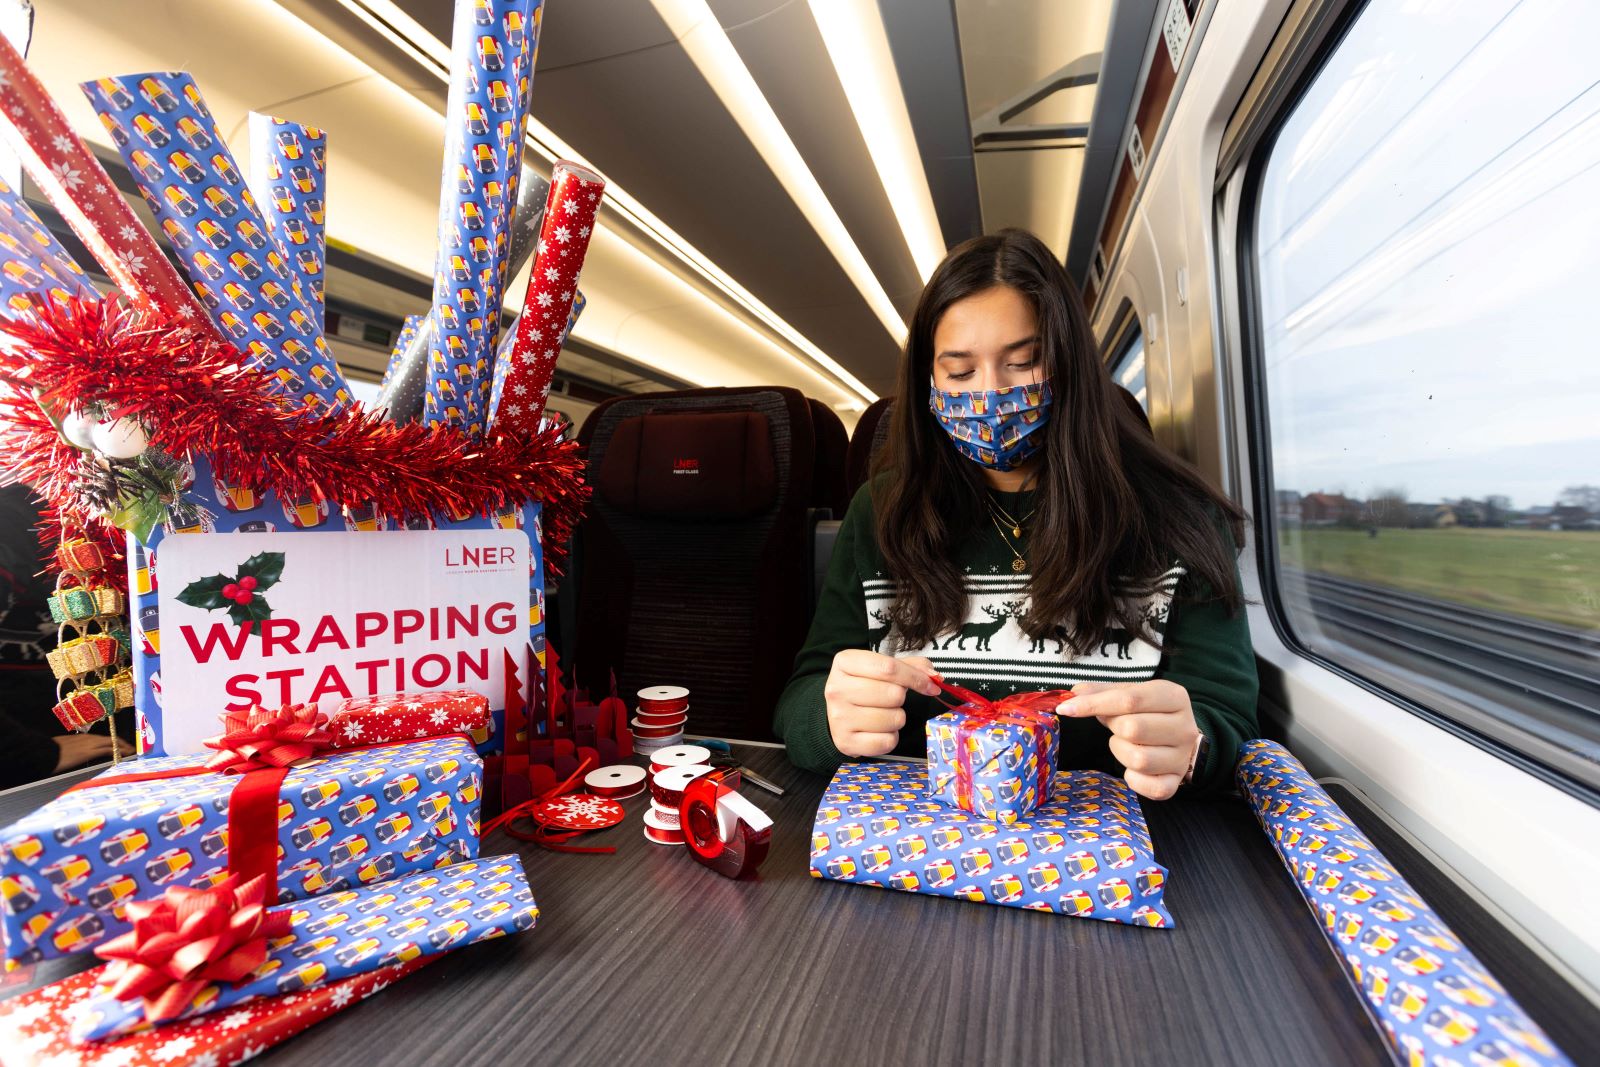 LNER Launches Professional Gift-Wrapping Service Onboard Trains This Christmas